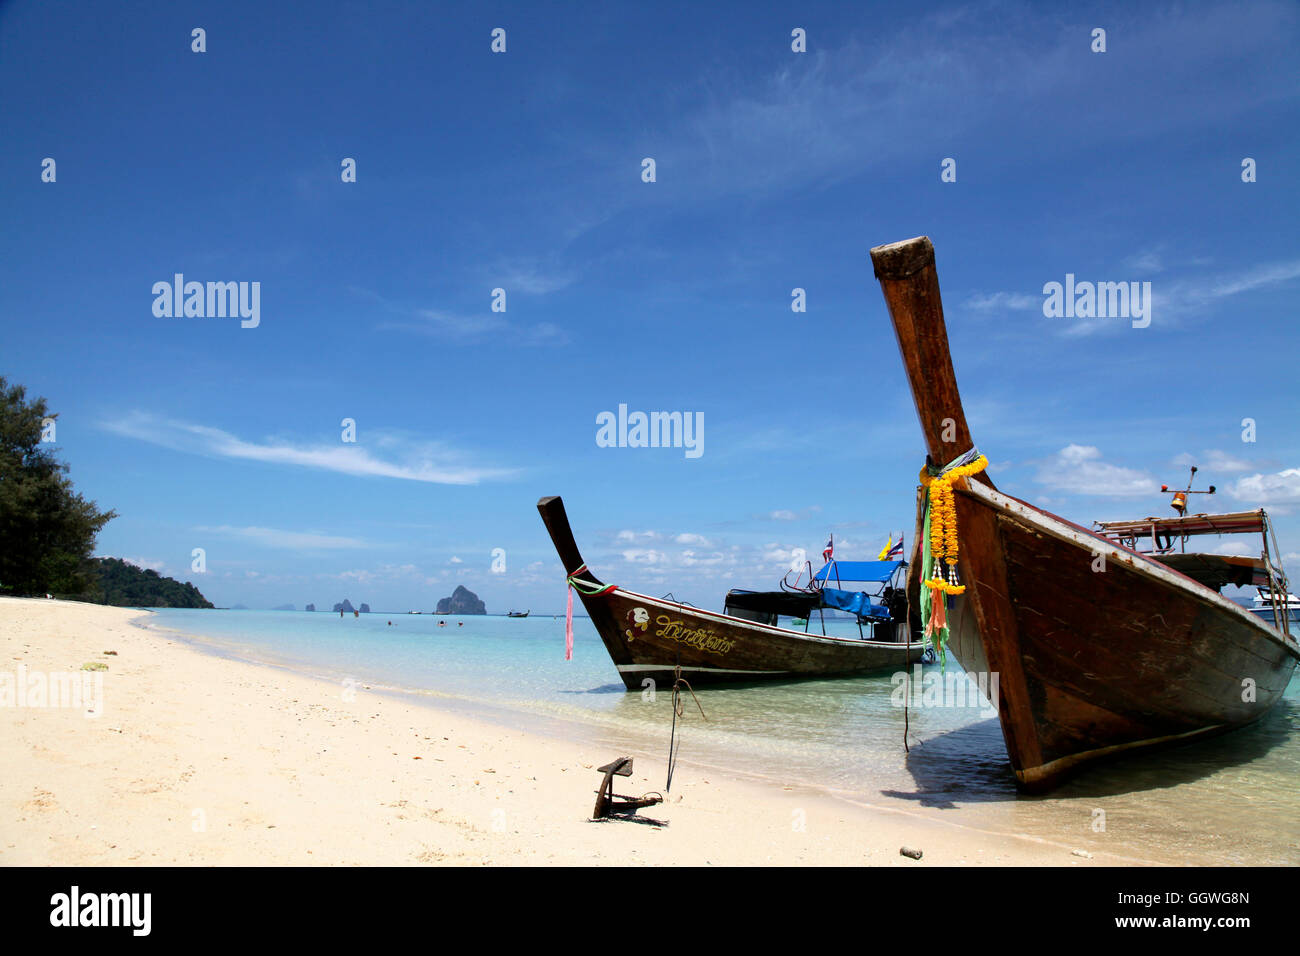 Two Thai fishing boats pulled onto the beach of a Thai Island in the Andaman sea Stock Photo